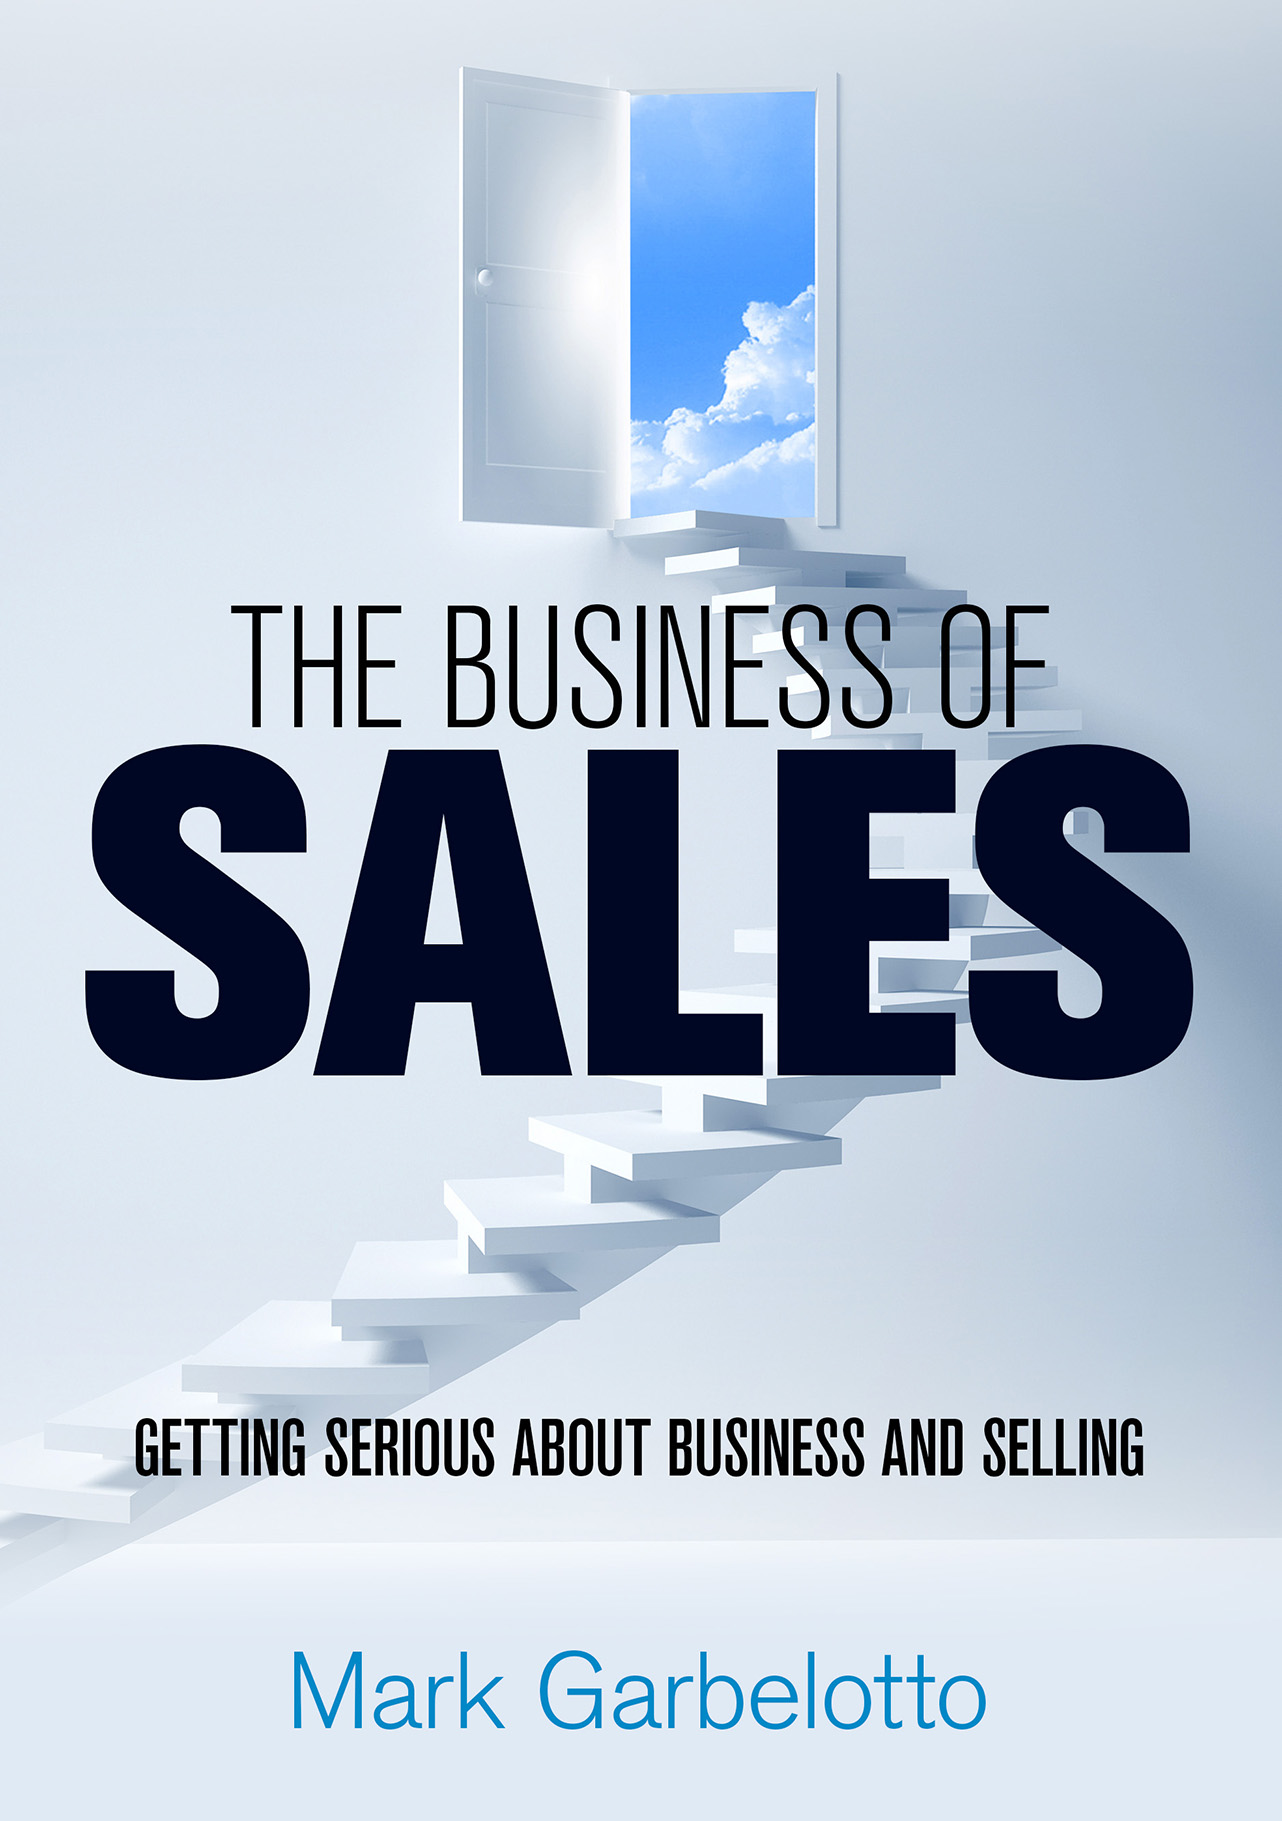 Business of Sales cover 02.jpg